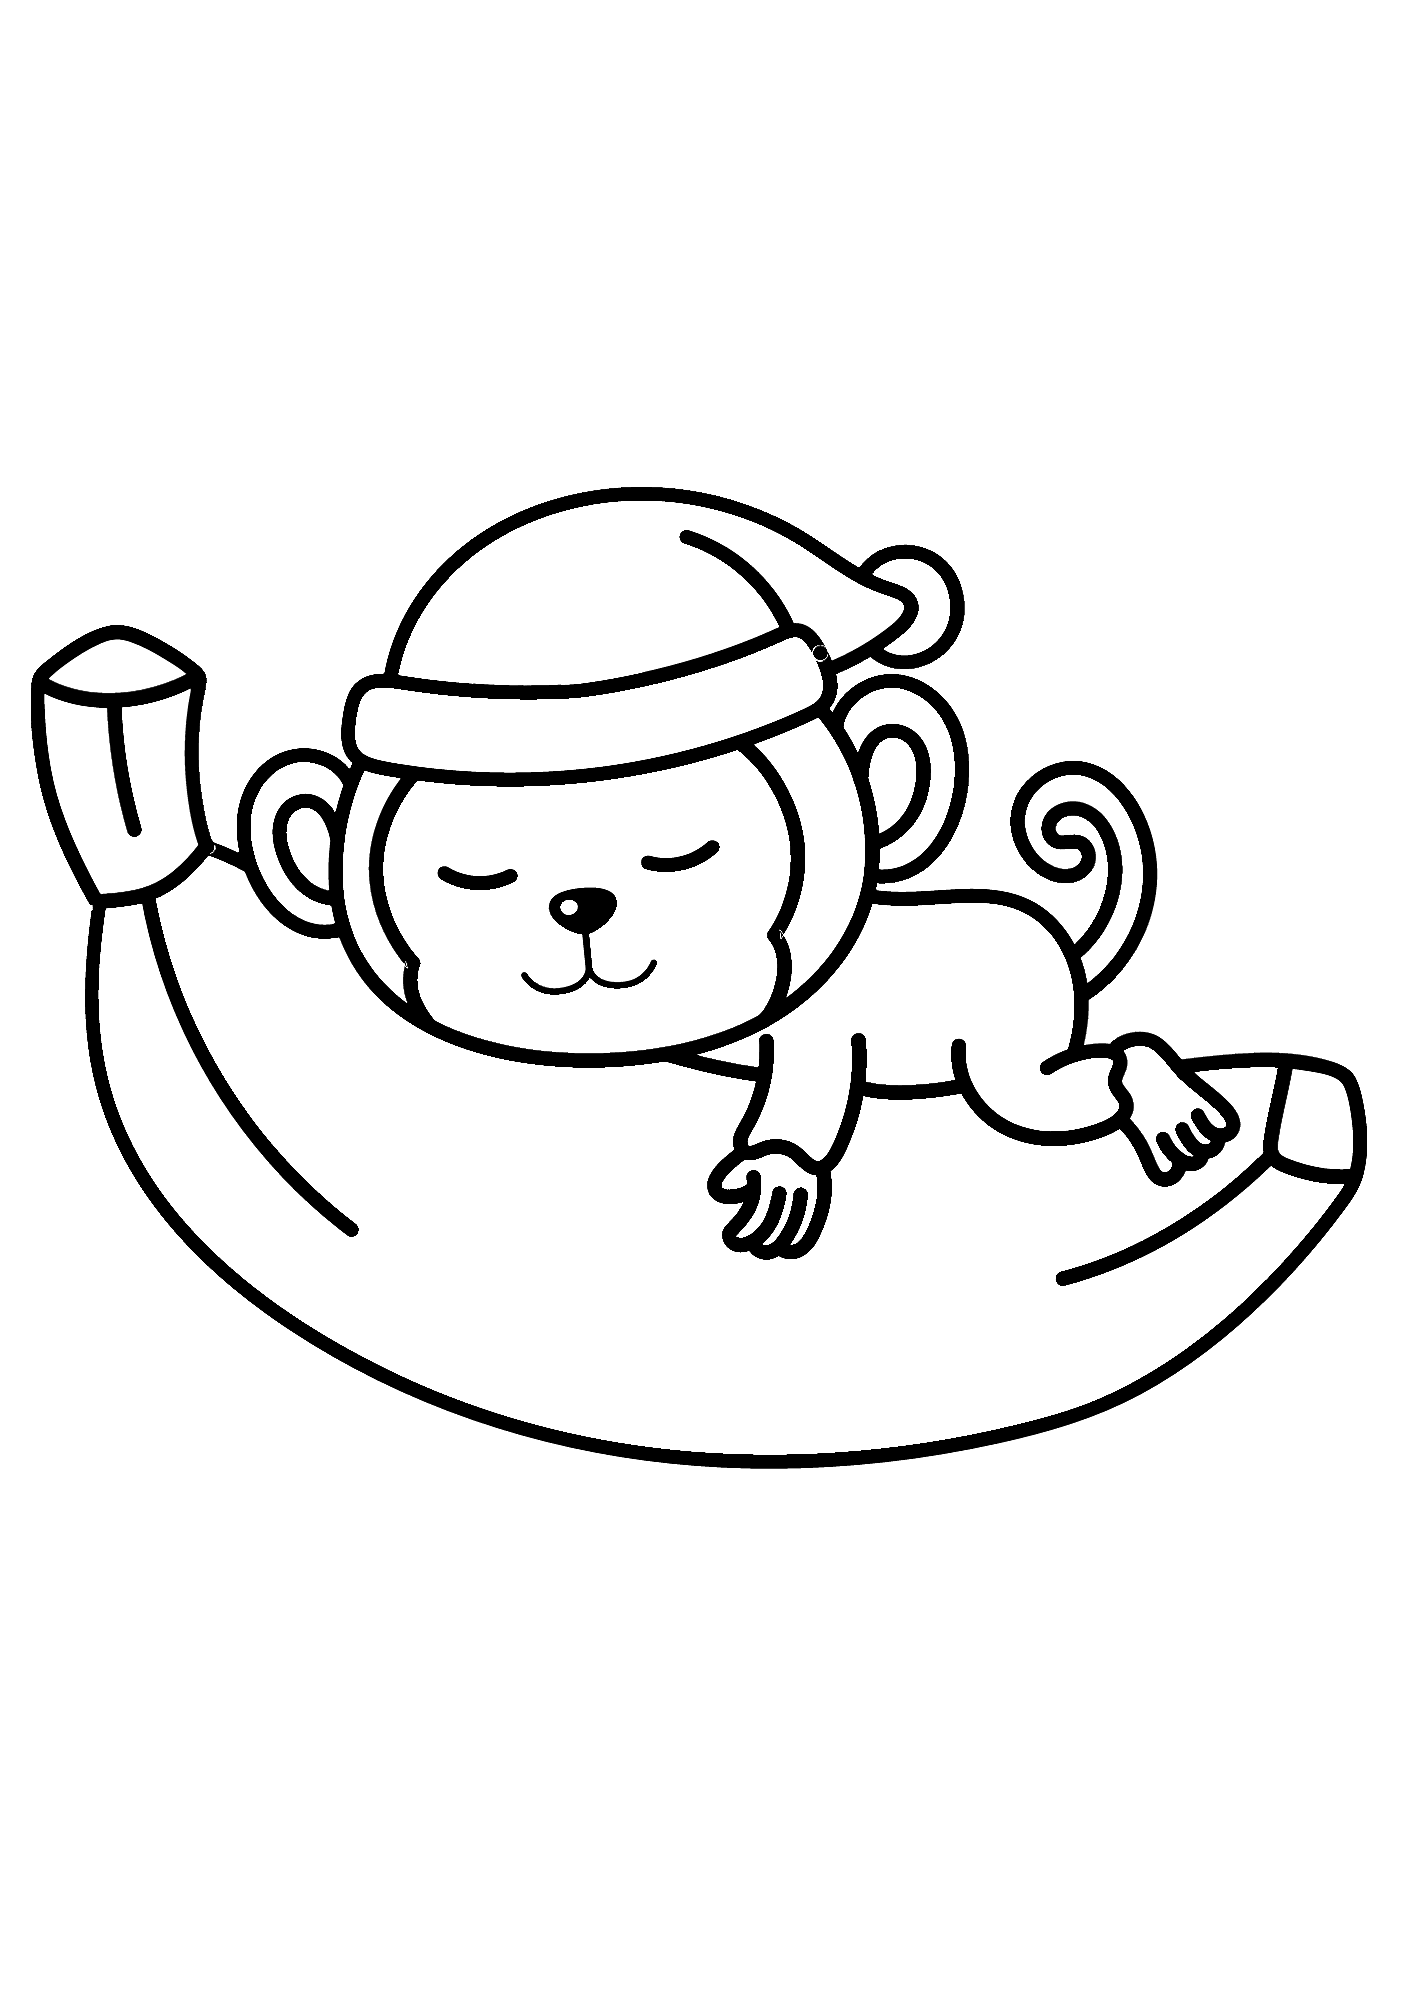 Monkey Sleep With Banana Coloring Pages